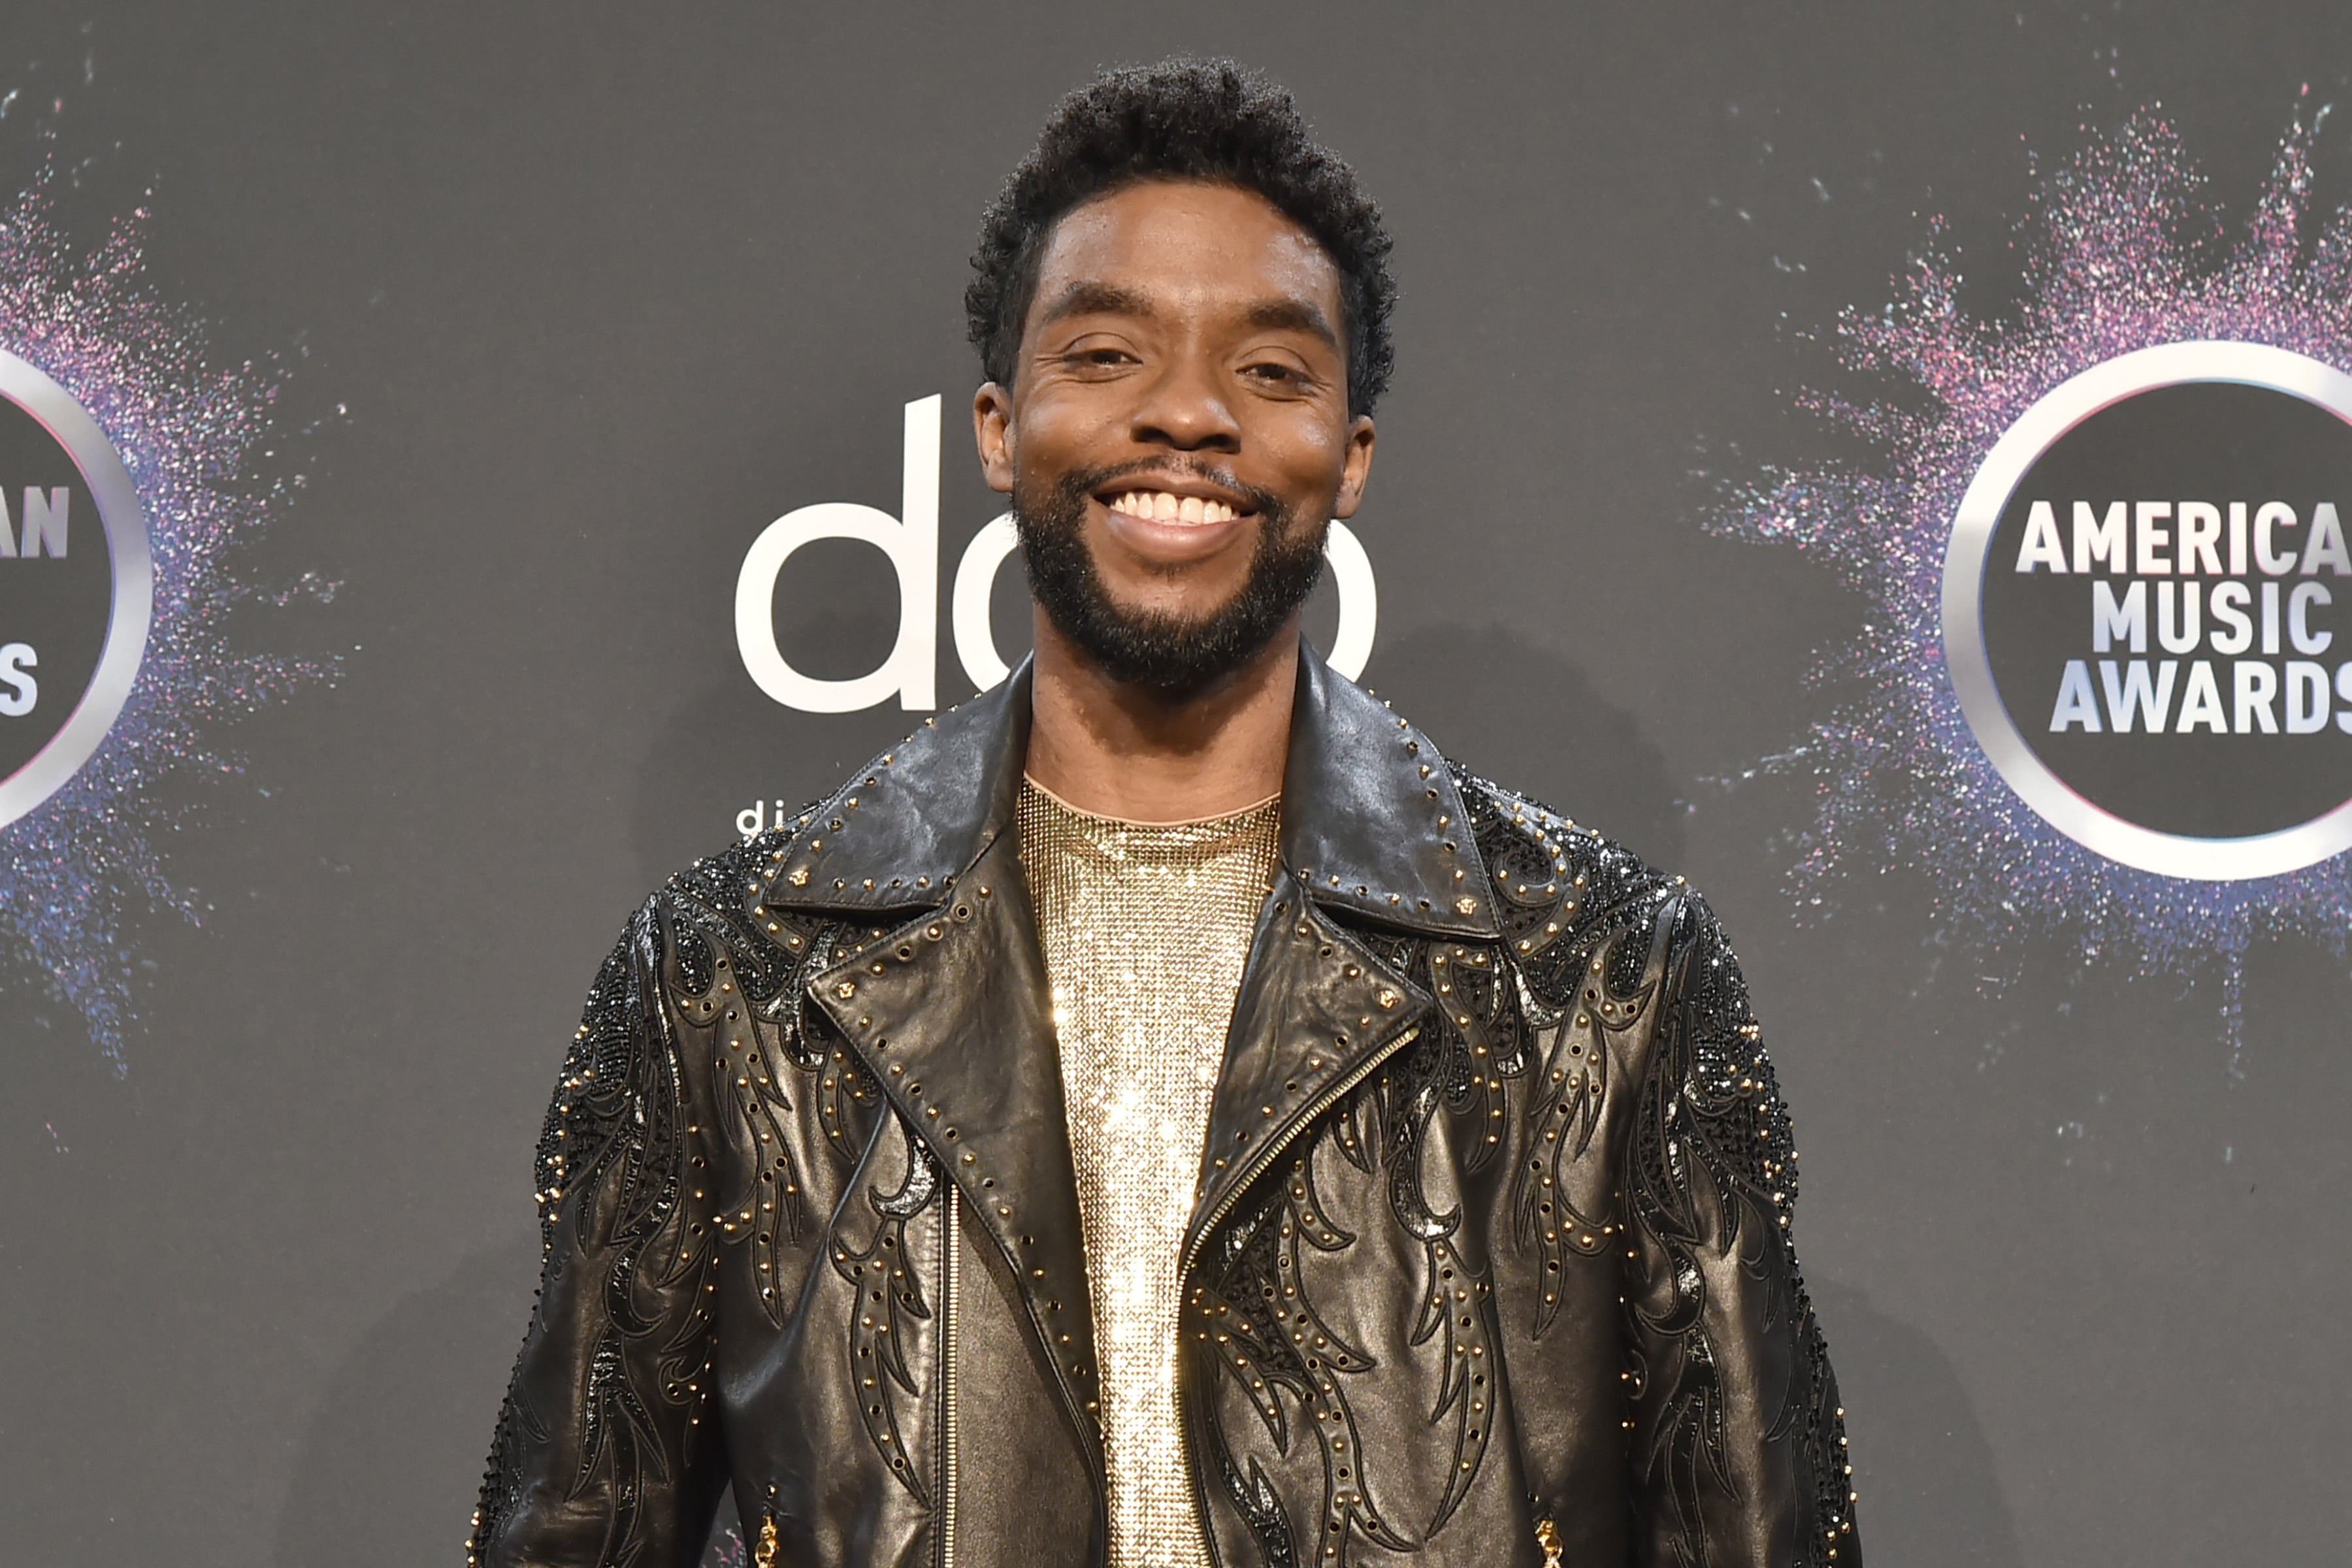 Chadwick Boseman had previously spoken about his special bond with